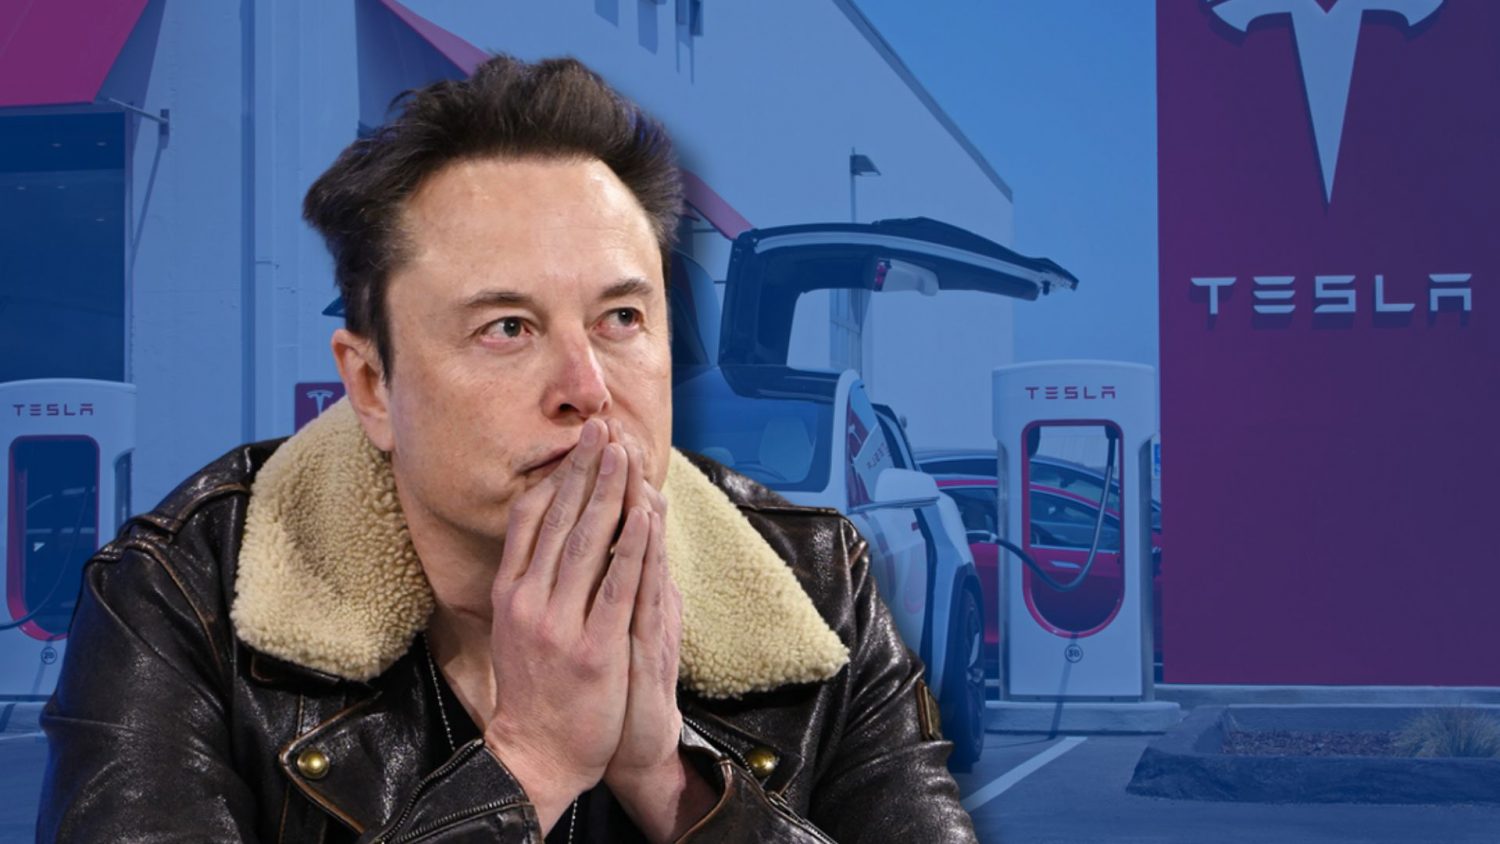 Leading up to the settlement, Tesla argued that the driver had been playing a game on his phone before the crash.